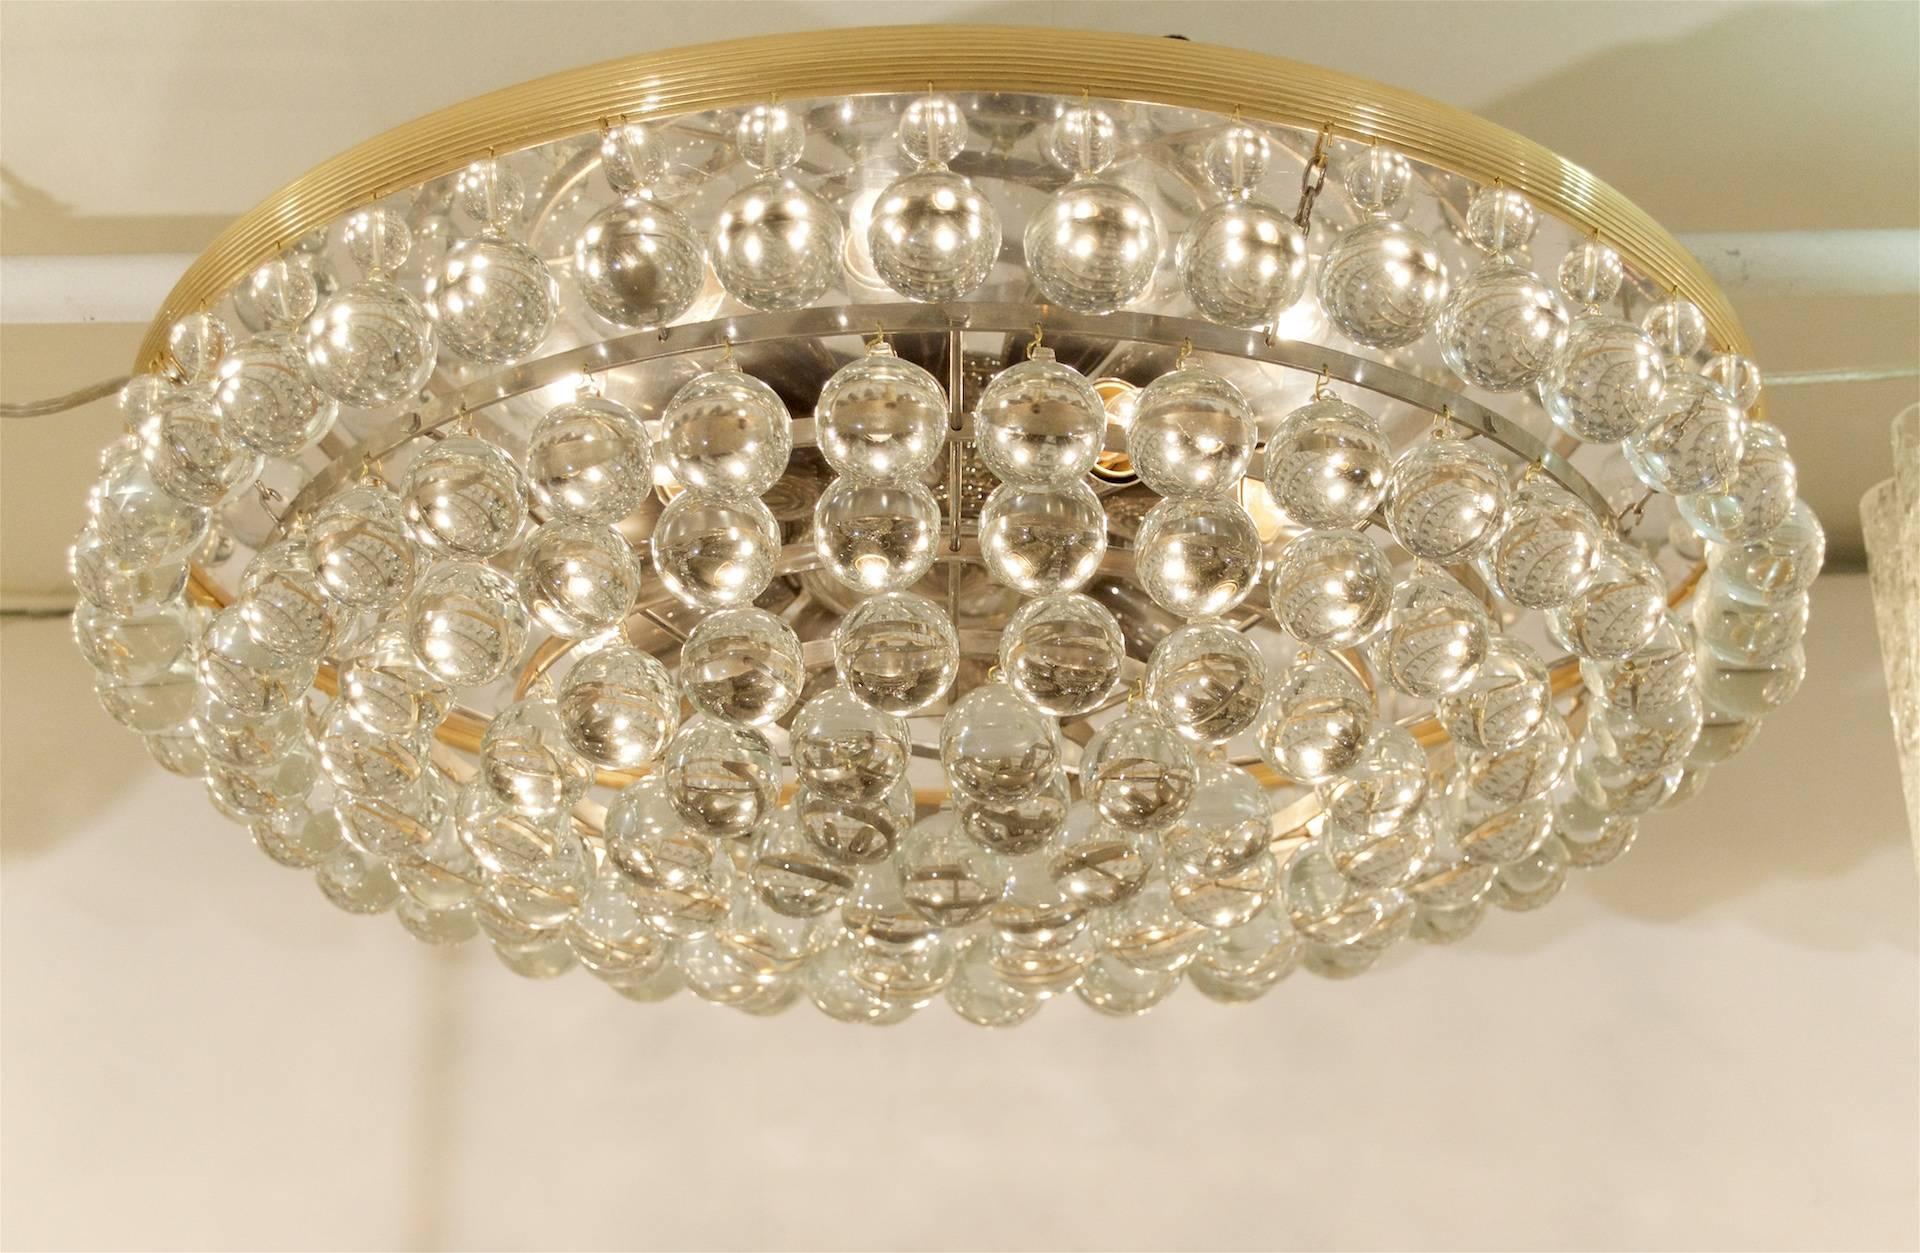 Elegant fixture, with 138 blown lead crystal balls suspended from individual wires. Gold-plated and metal finish will complement all decors. 

Takes 10 E-14 base bulbs up to 40 watts per bulb.